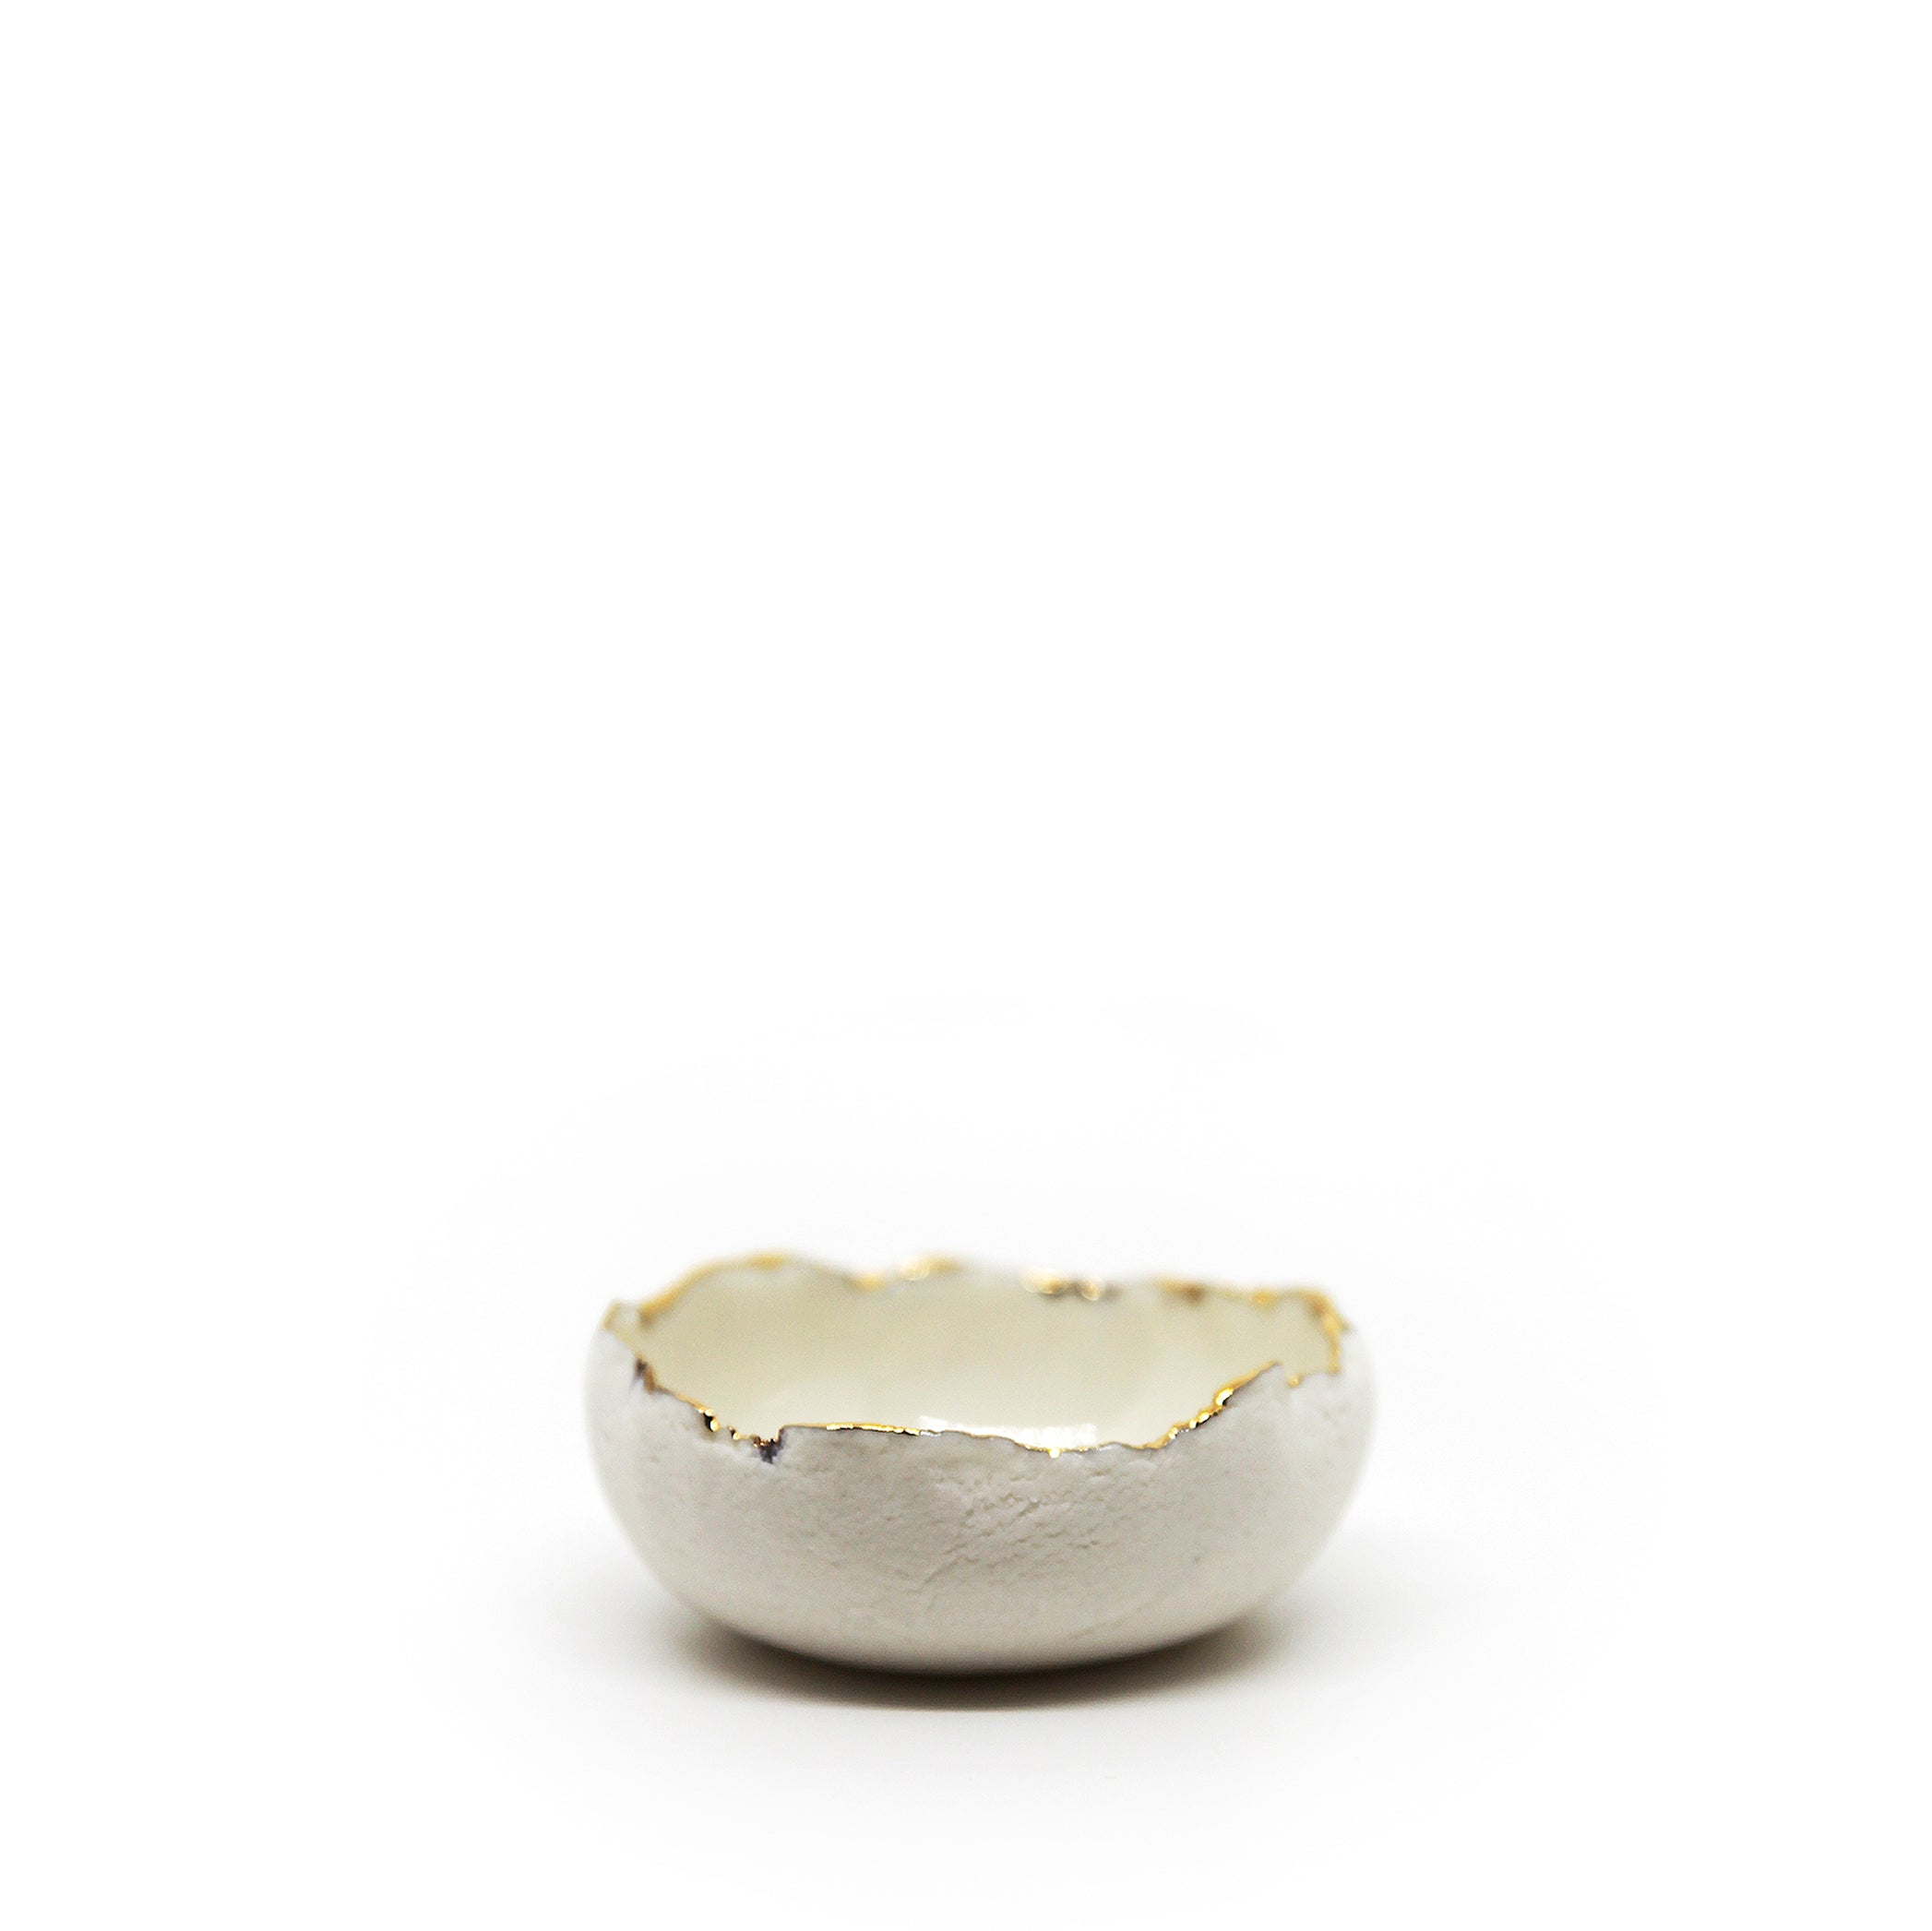 HB Jagged Bowl with Gold Alphabet, 7cm